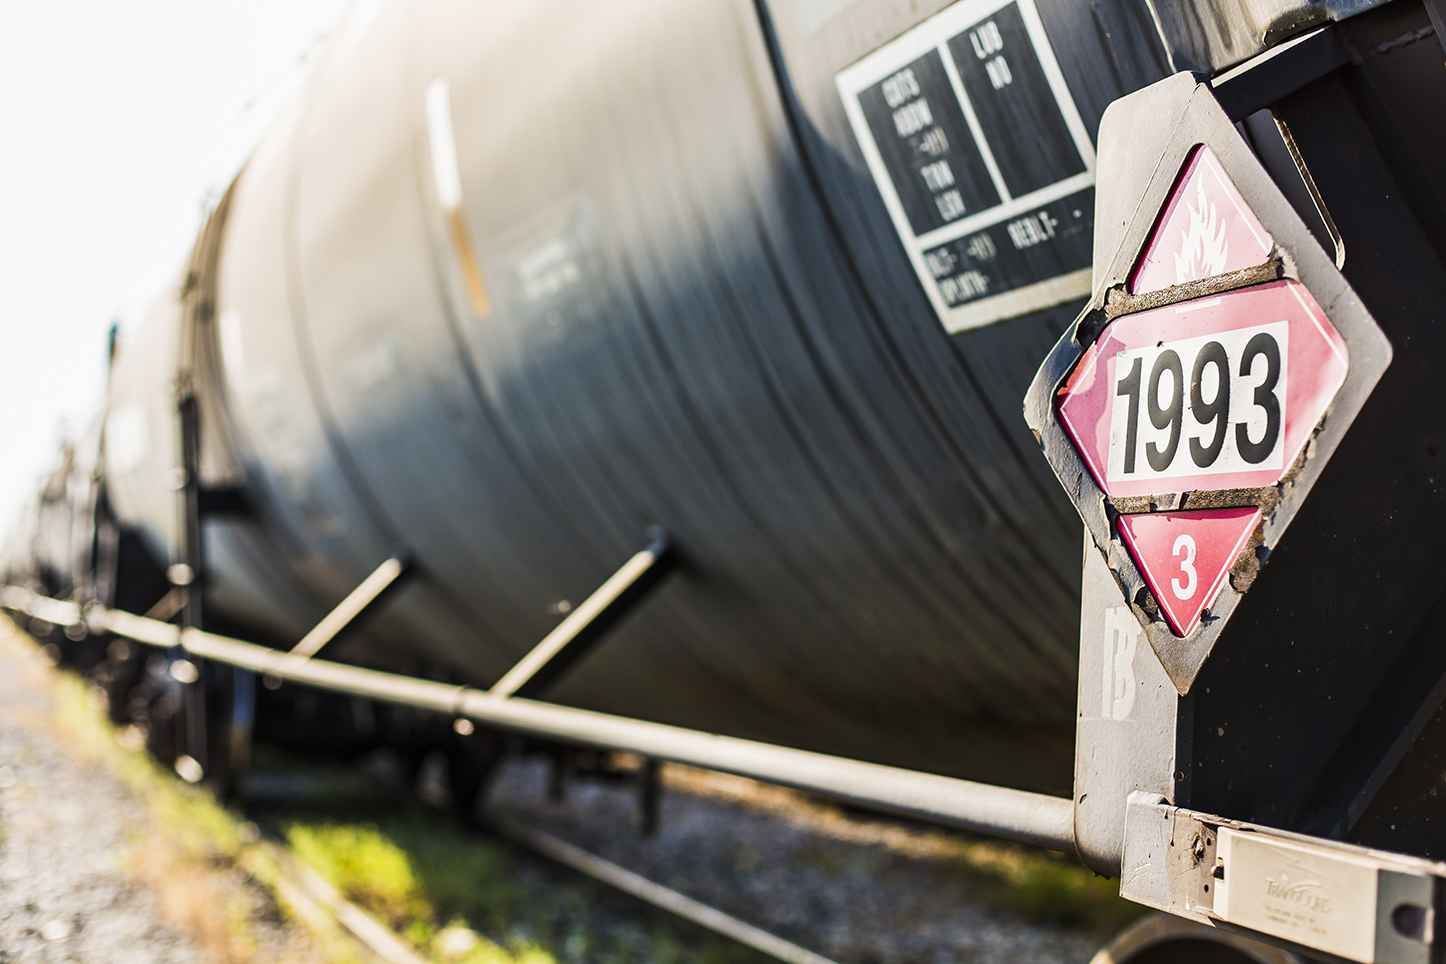 WHO HAS THE POWER? While all parties agree that new industry standards for stronger, safer tank car designs are needed, there is disagreement over the extent of the design changes and who has authority to mandate those changes.